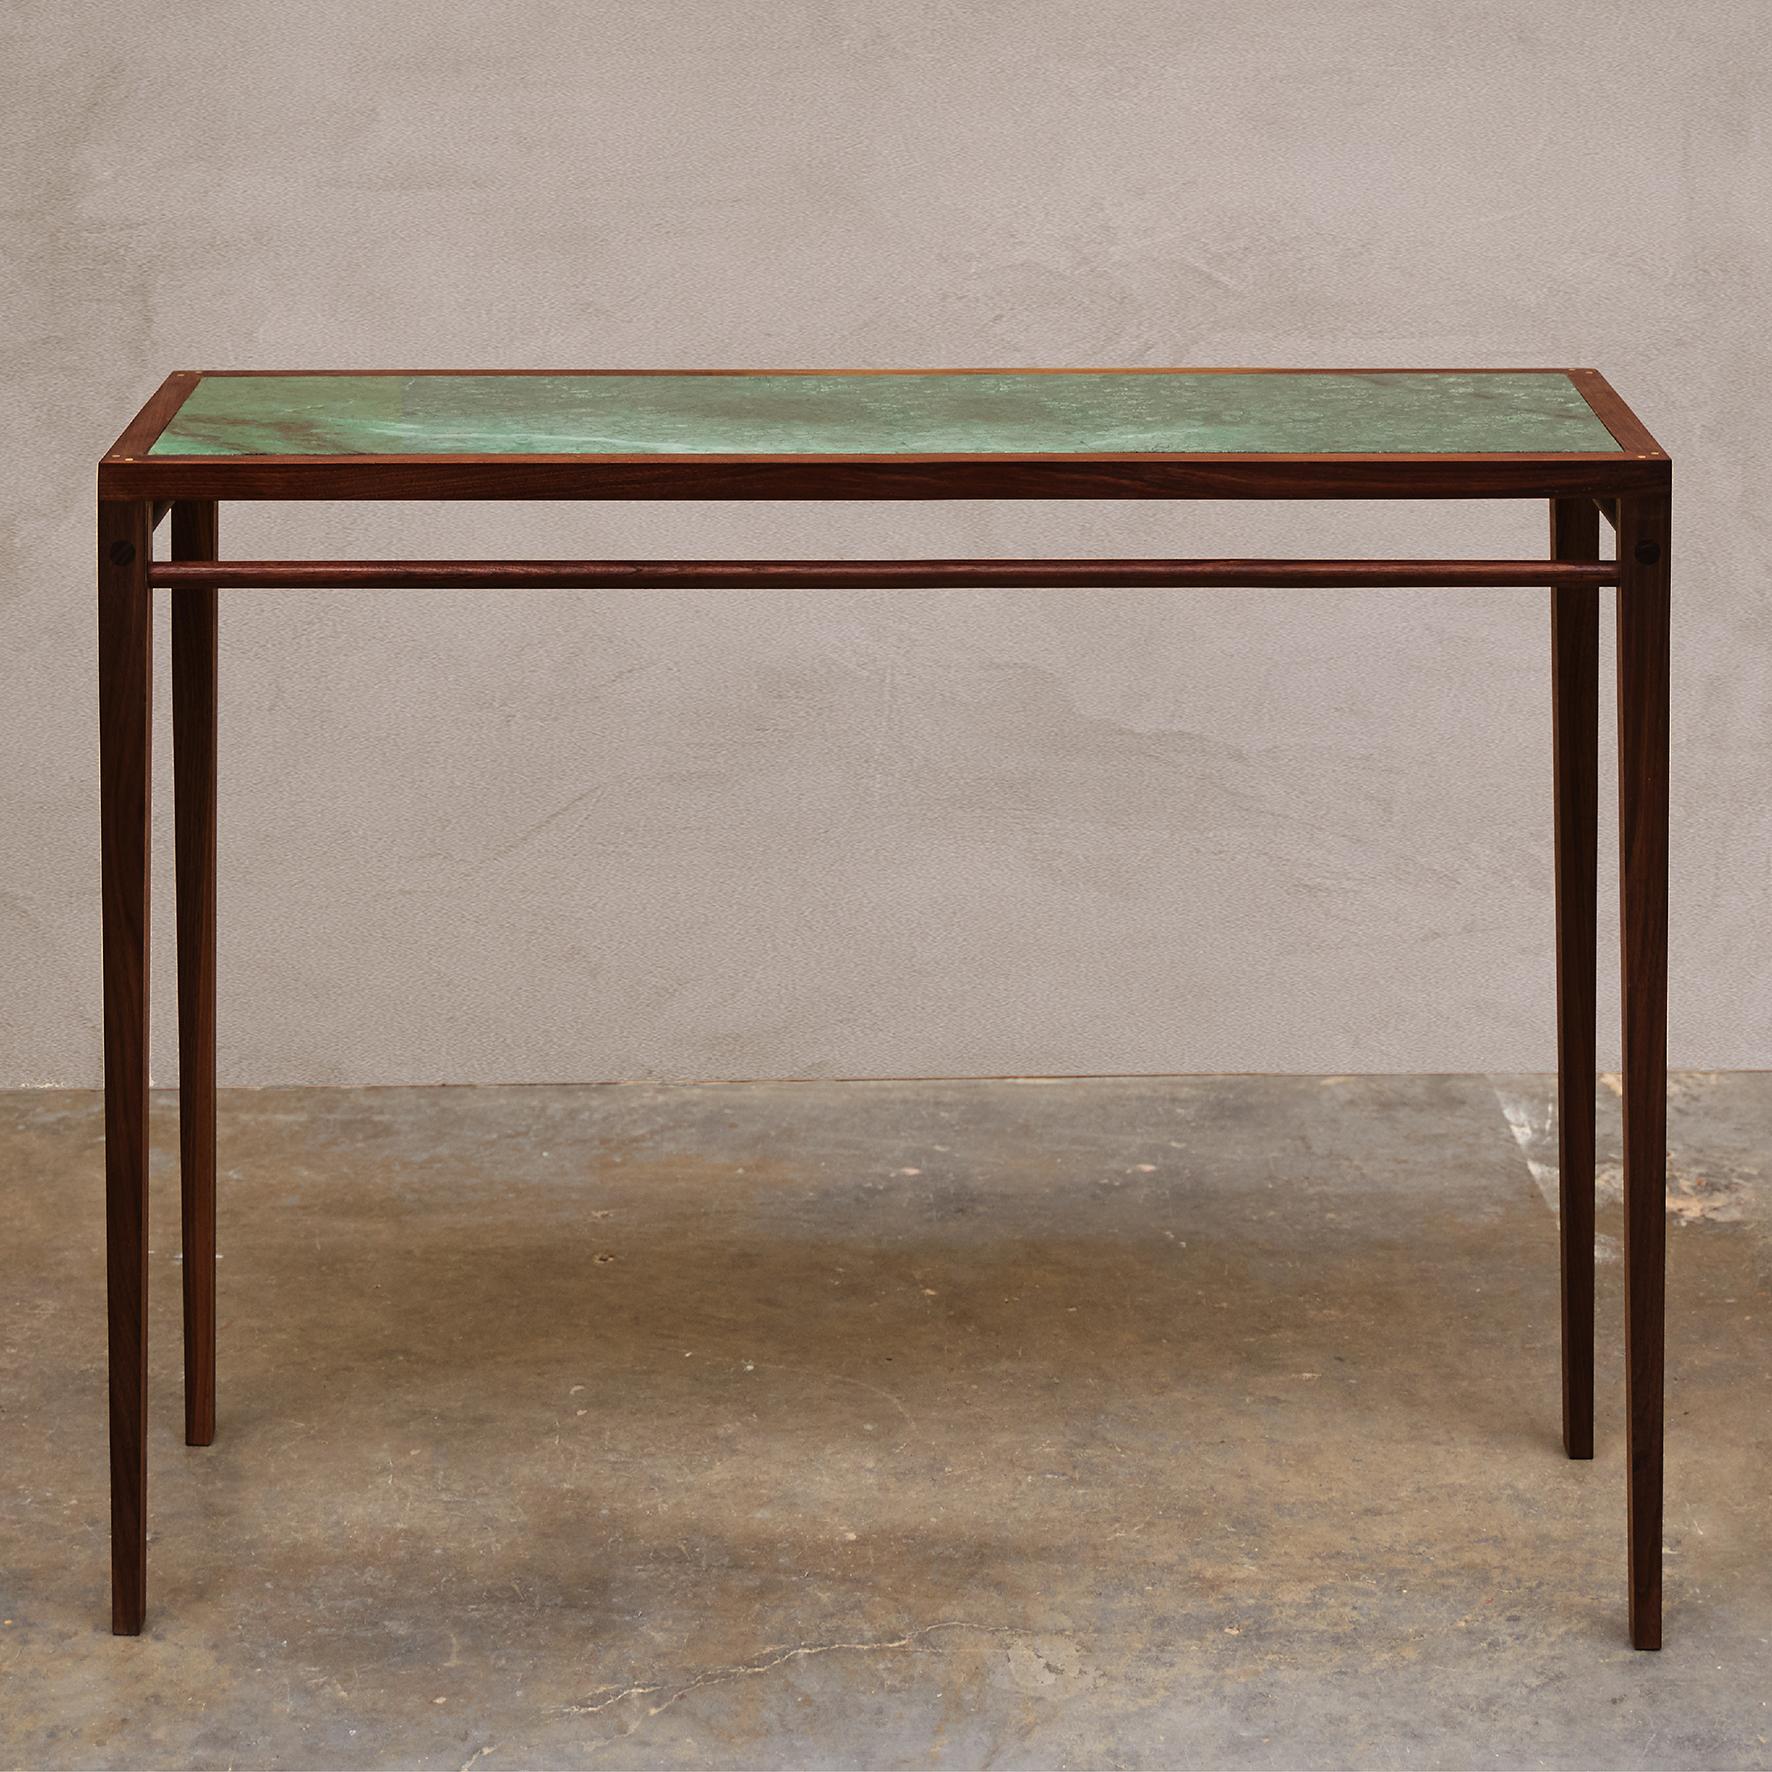 Matang

Ganga console

A walnut and marble table, the rectangular marble top within a walnut frame joined with brass dowels on four square feet.

Contemporary production.
Lead time : 8/9 weeks.

Different marbles and wood can be chosen :
- Pink or